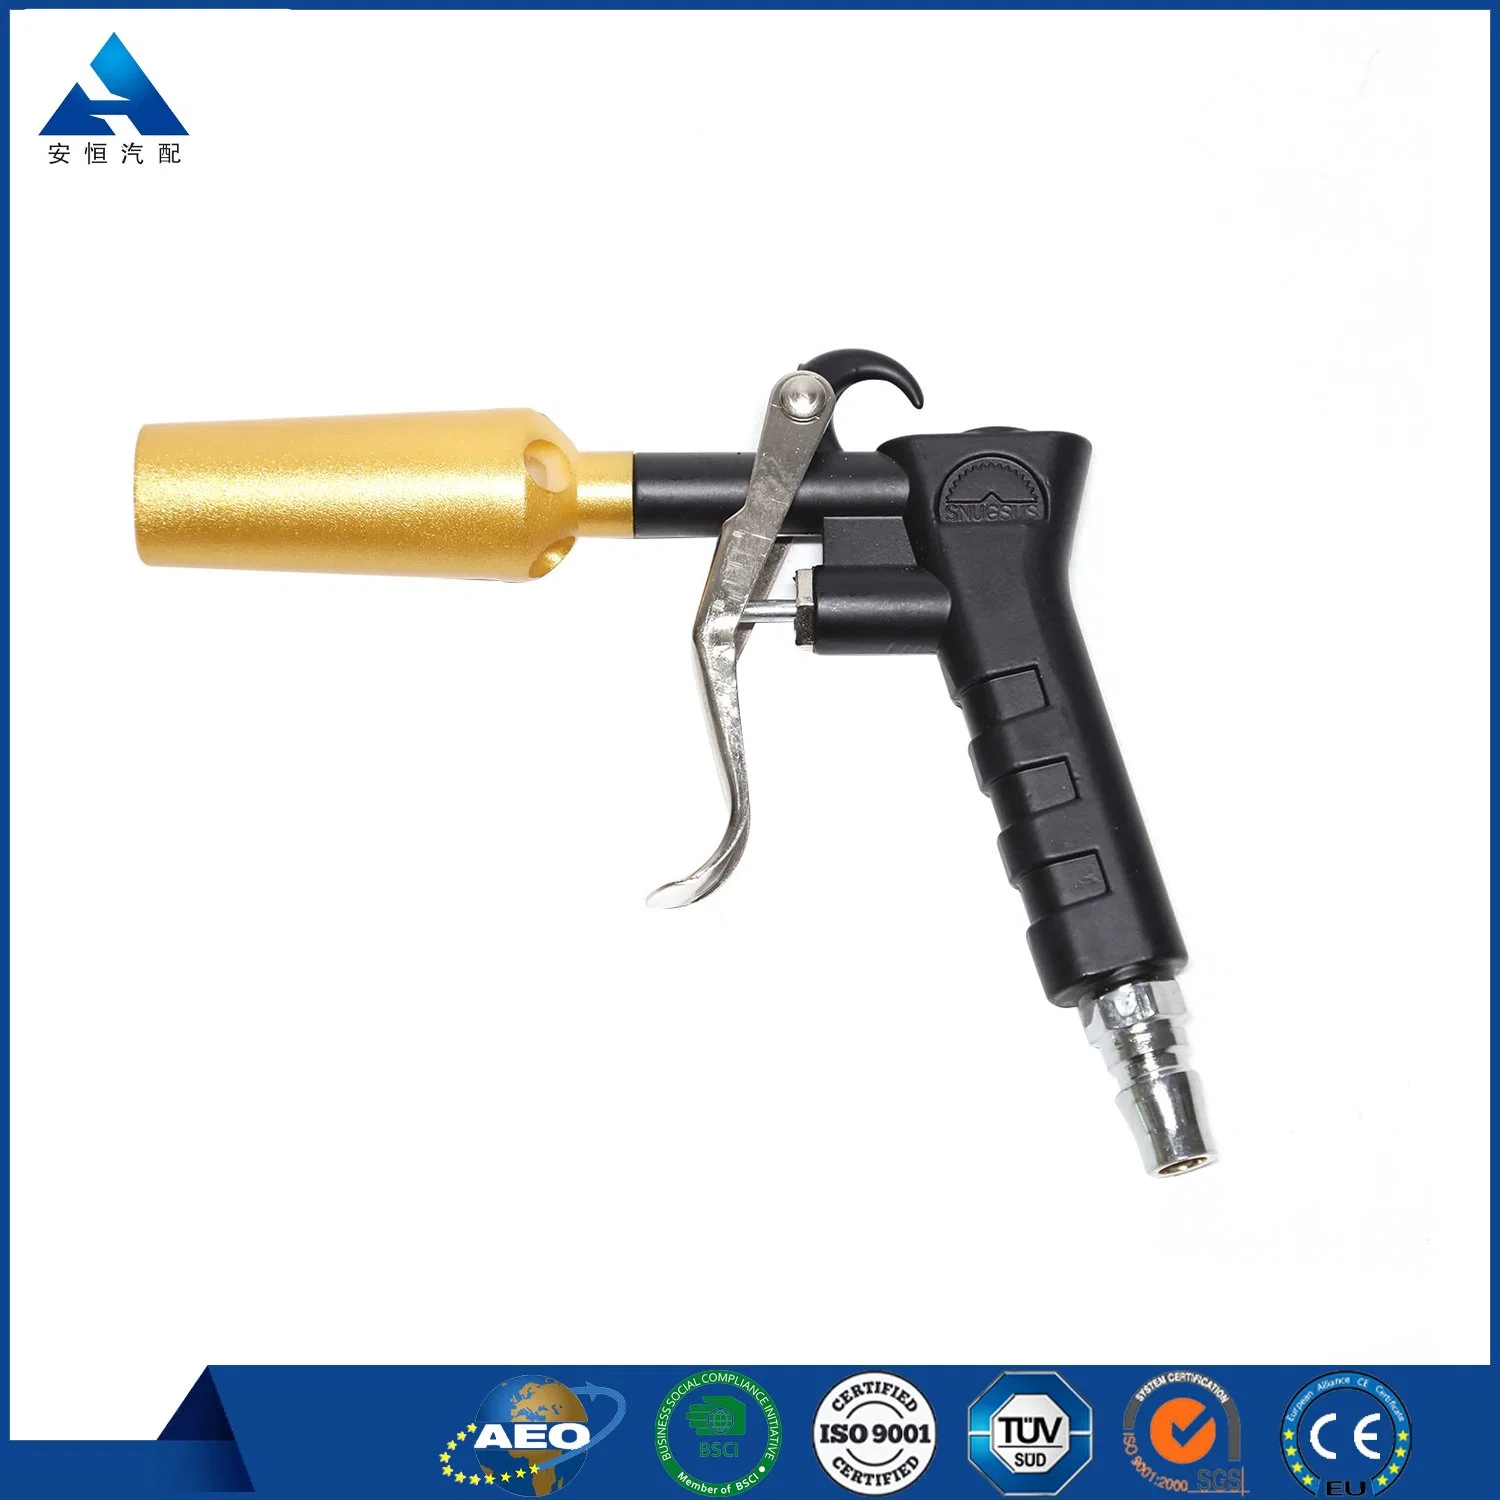 Air Compressor Accessories Pneumatic Dust Blow Gun Duster Cleaning Pneumatic Tools Sell Well